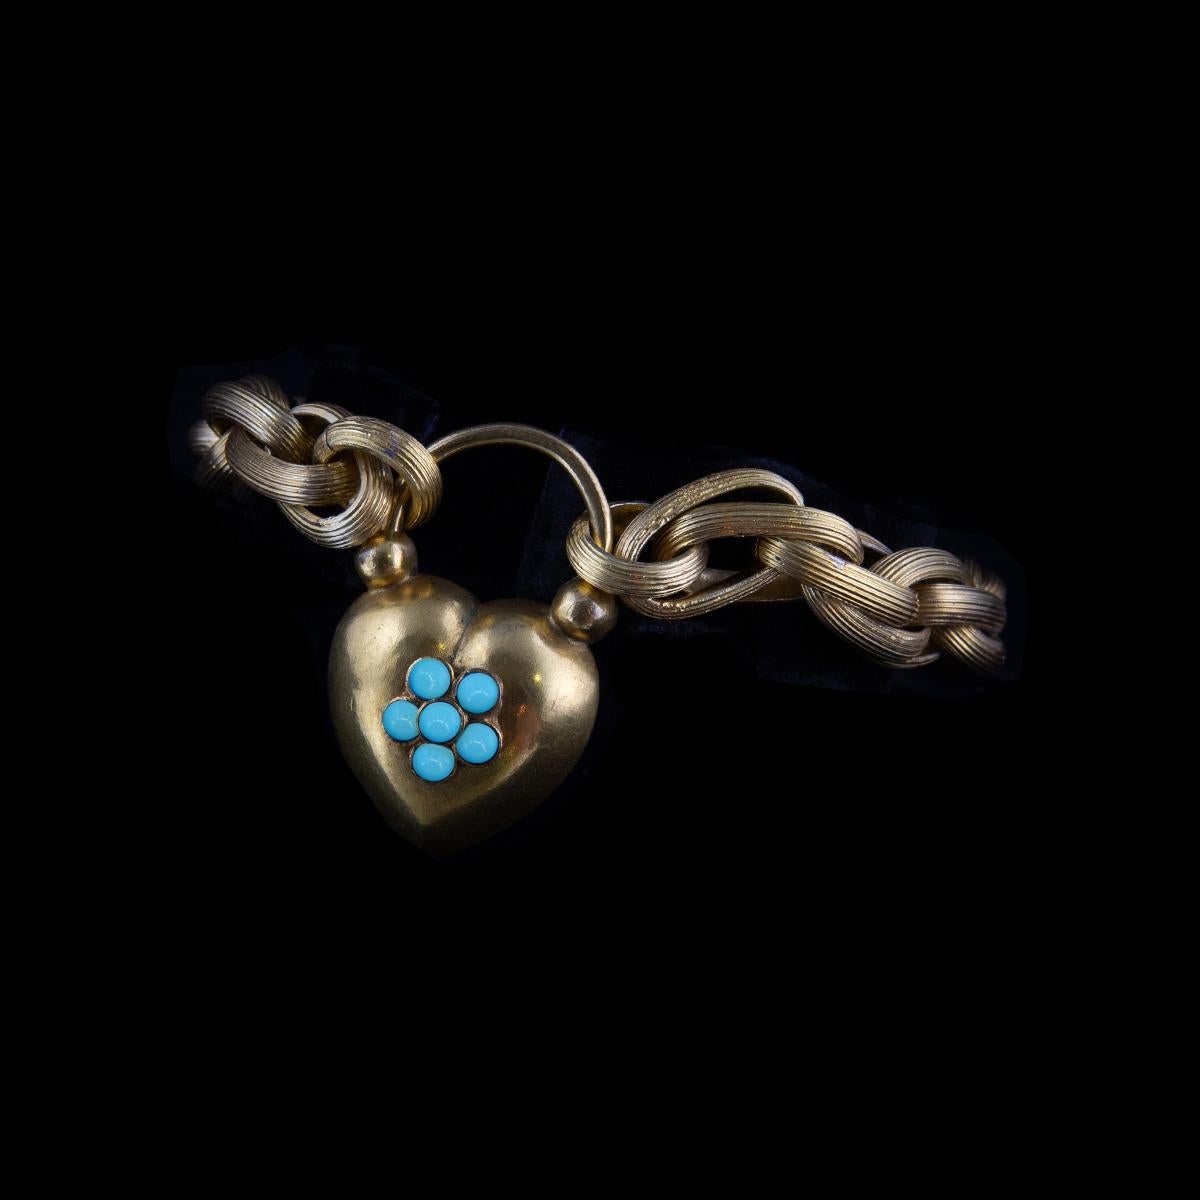 Women's 1860s Gilded Pinchbeck Bracelet with Heart Shaped Clasp with Turquoises For Sale